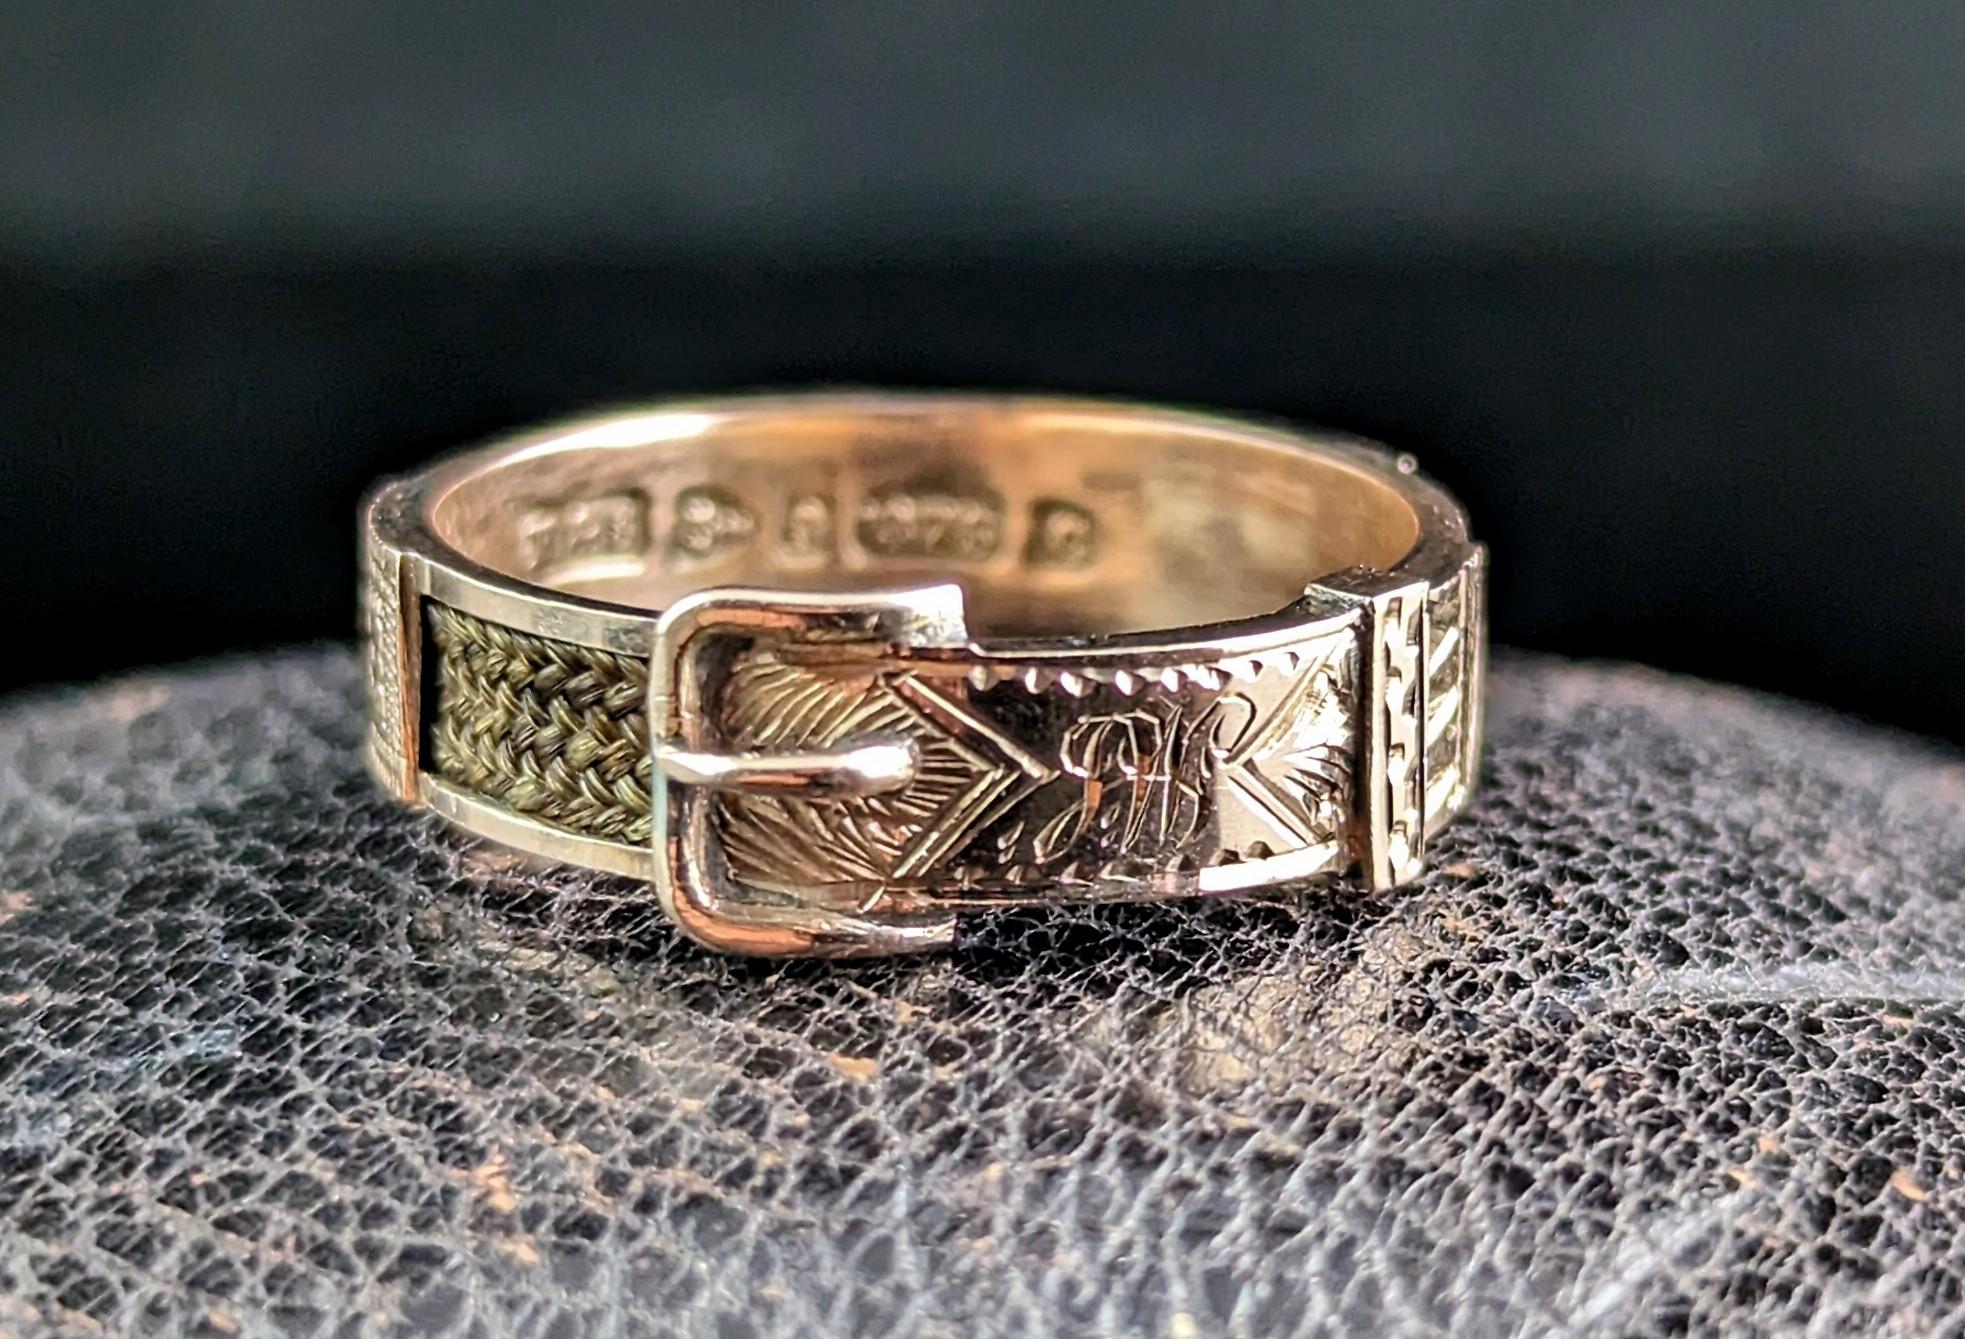 A stunning antique, Victorian era mourning ring.

So full of sentiment, these Mourning rings have tonnes of symbolism, the buckle traditionally signifying holding someone close so a great fit for a Mourning piece.

Rich 9kt yellow gold, it is